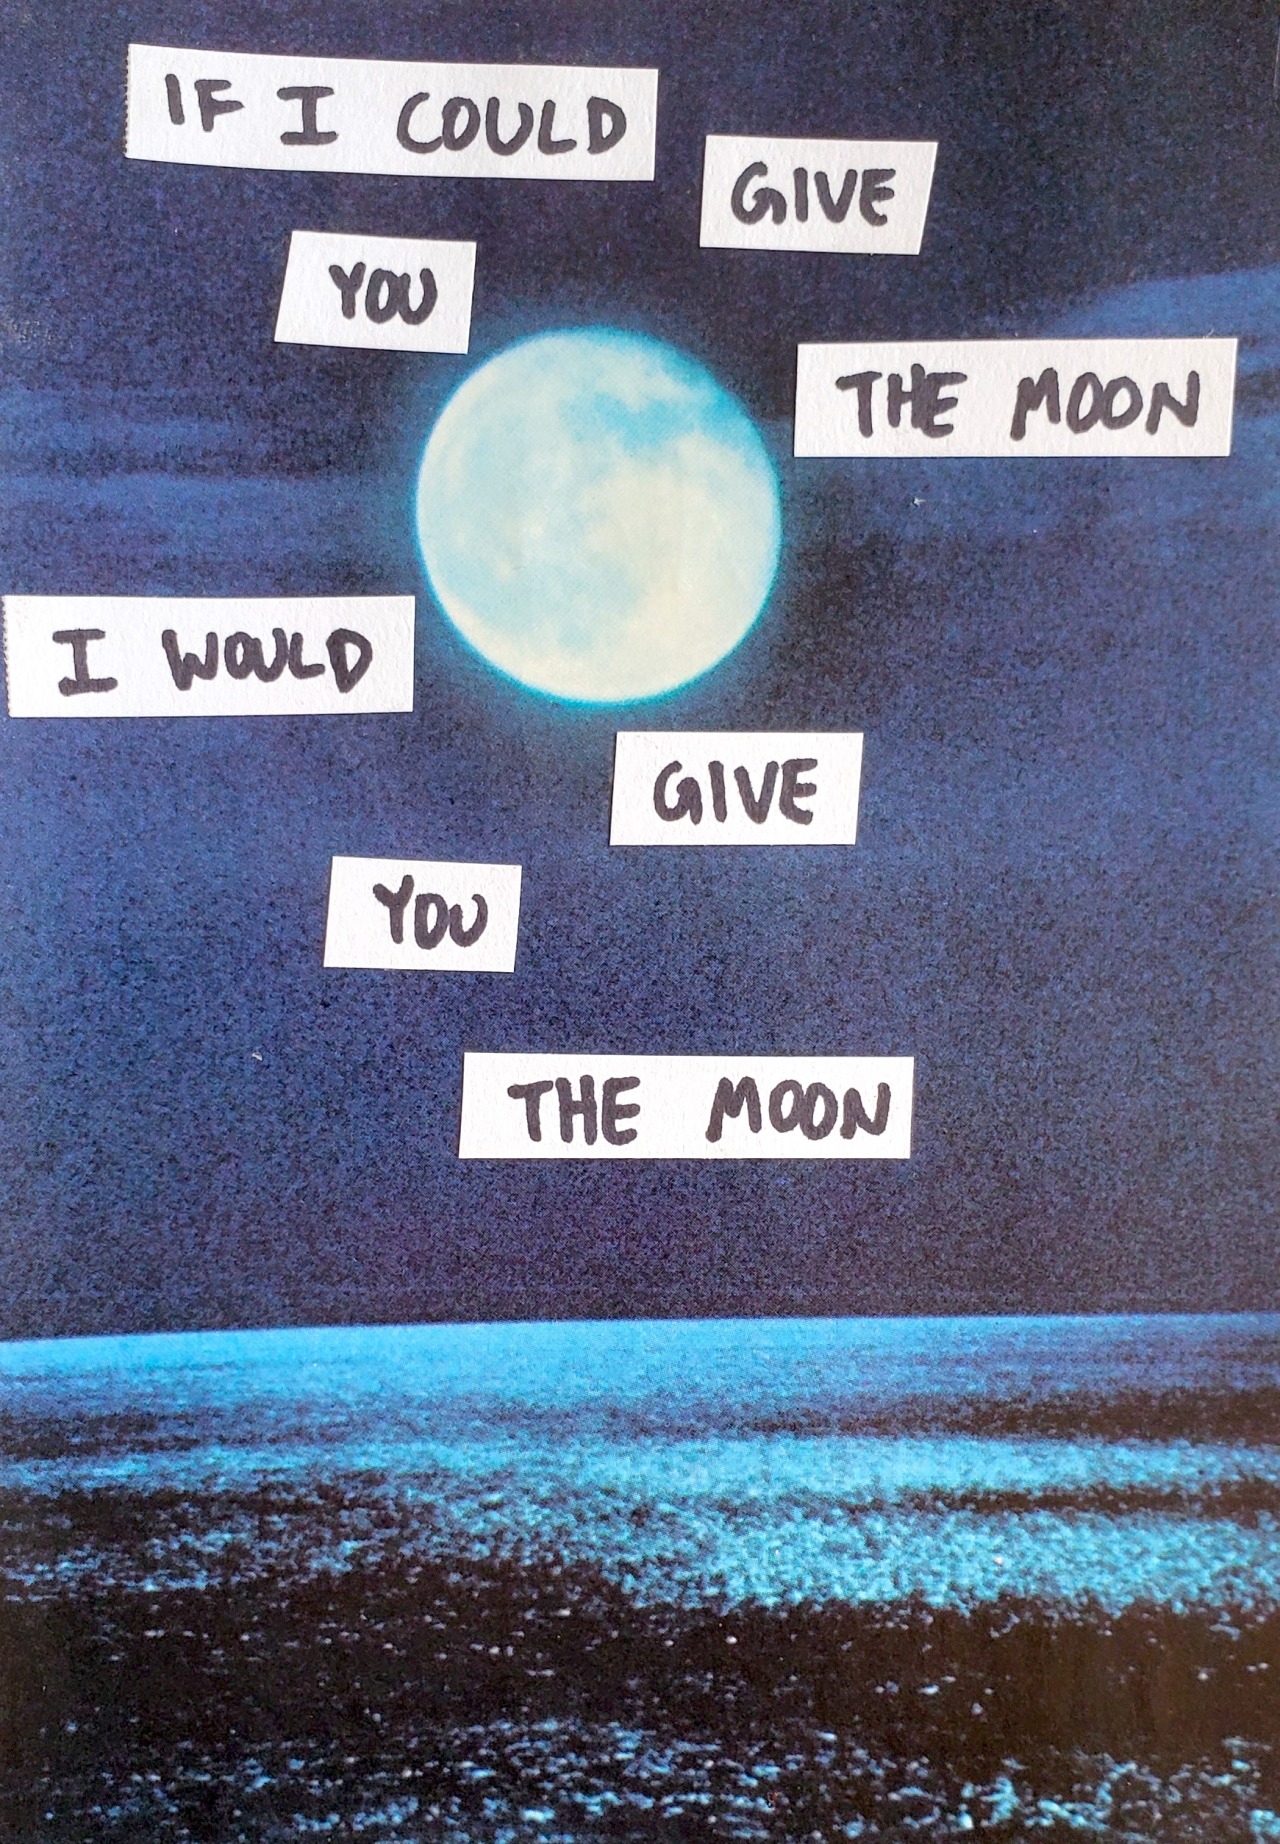 moon song 'if i could give you the moon i would give you the moon' Phoebe Bridgers lyric embroidery hoop wall art